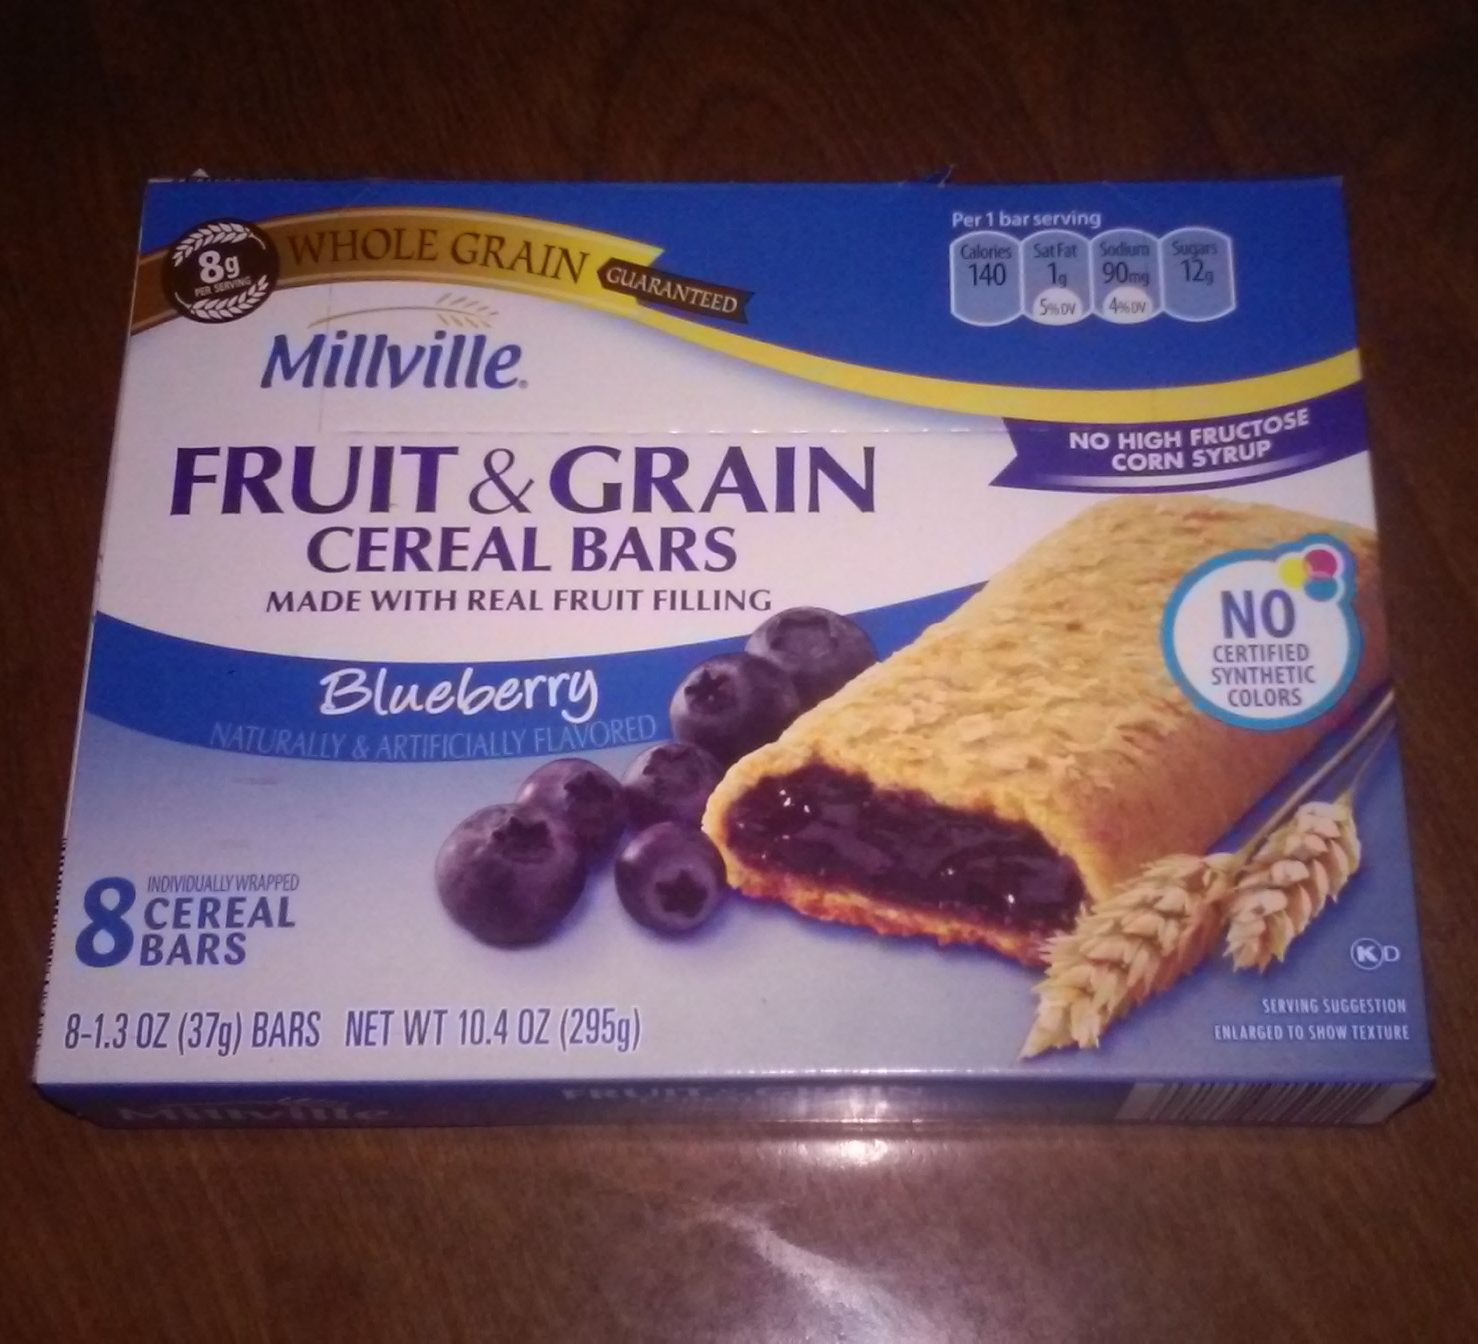 Millville Fruit and Grain Cereal Bars